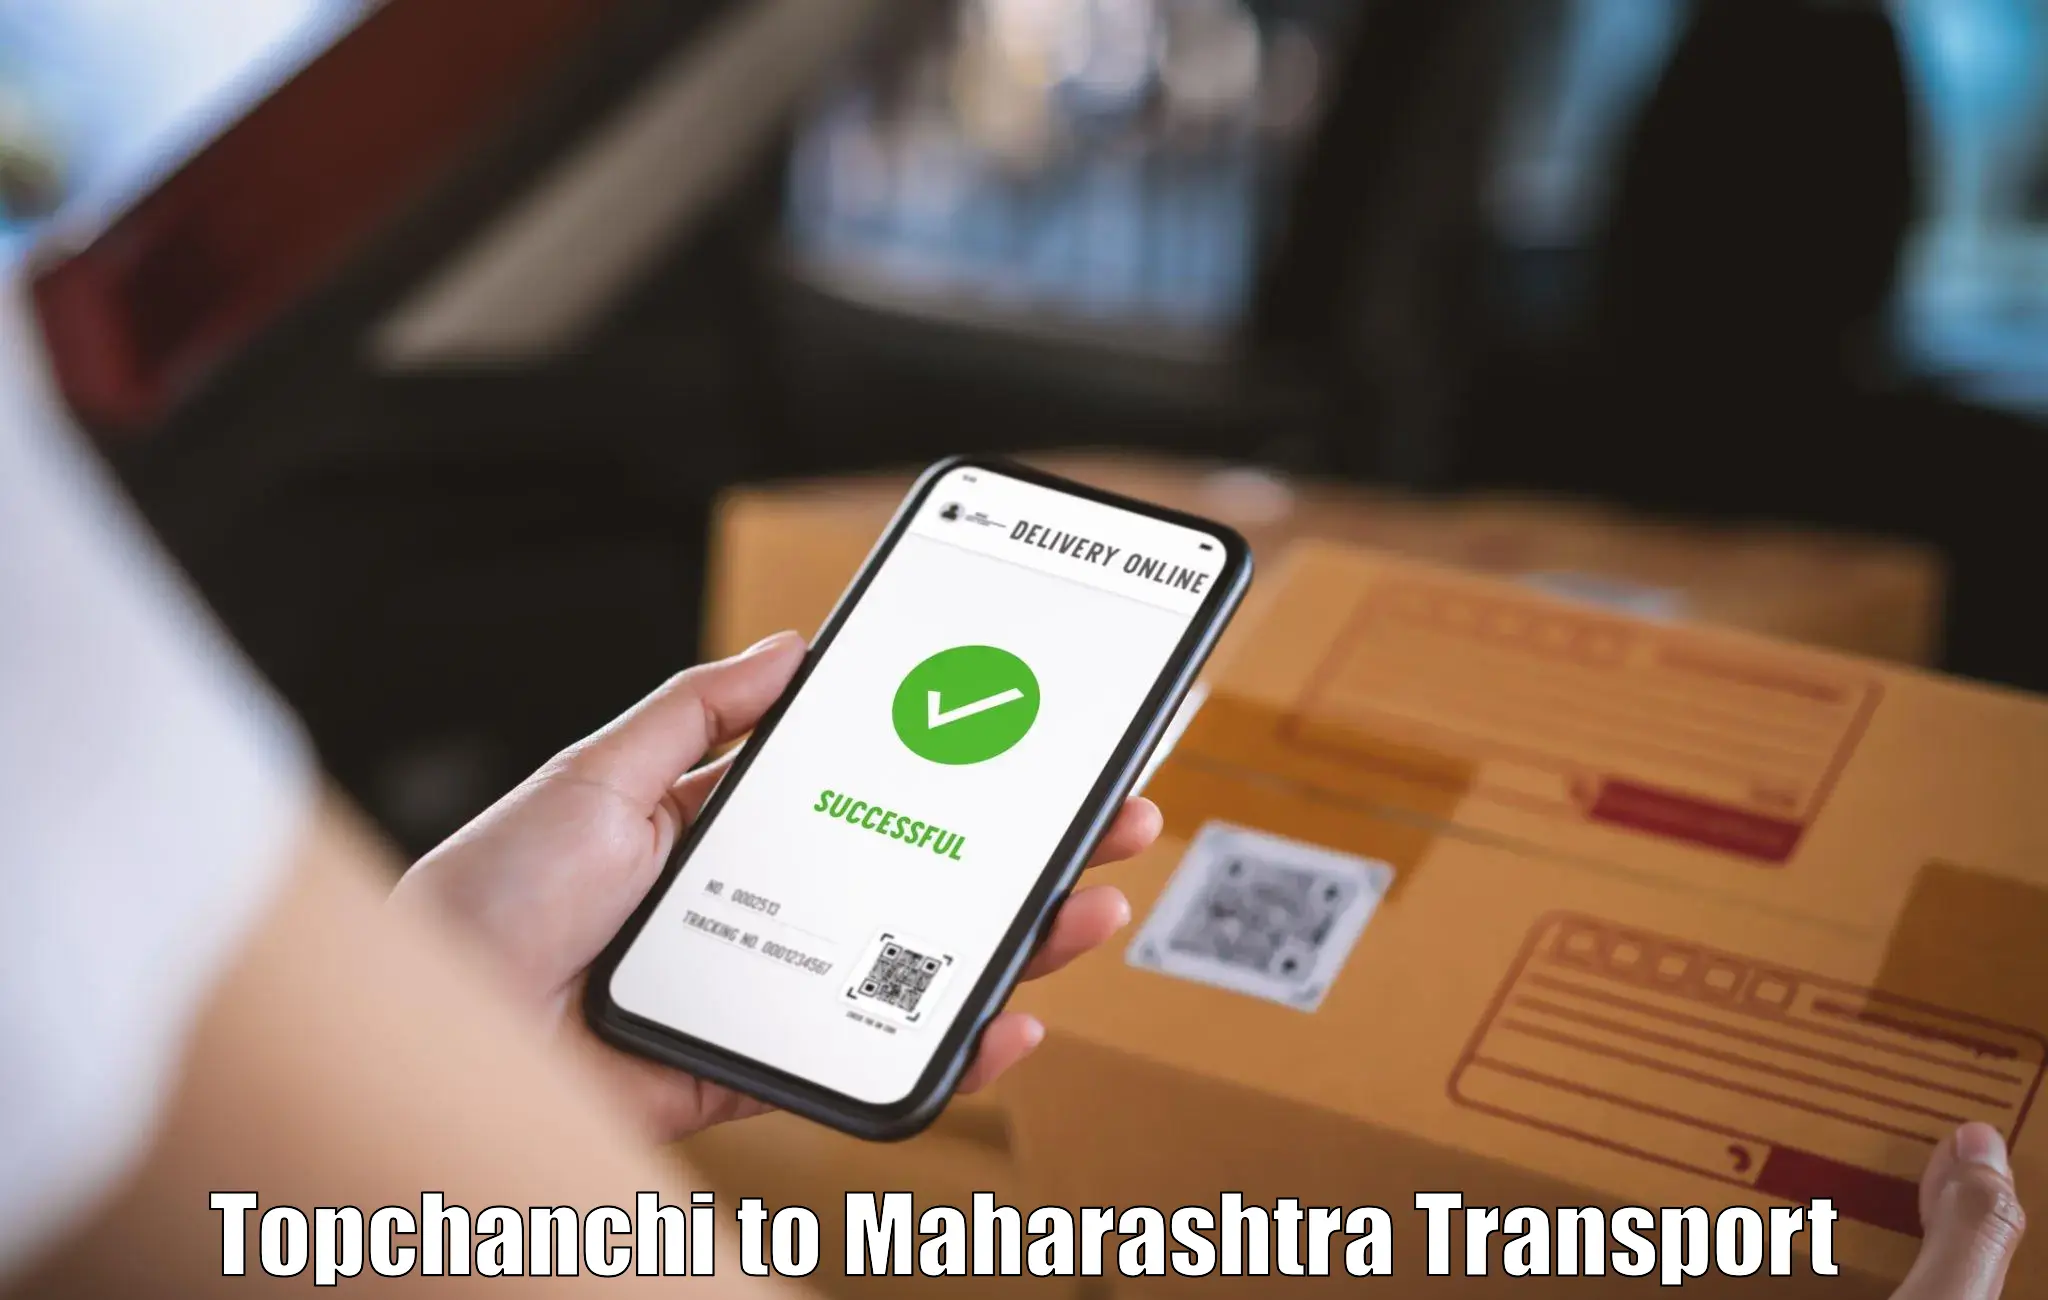 Cargo train transport services Topchanchi to Pune